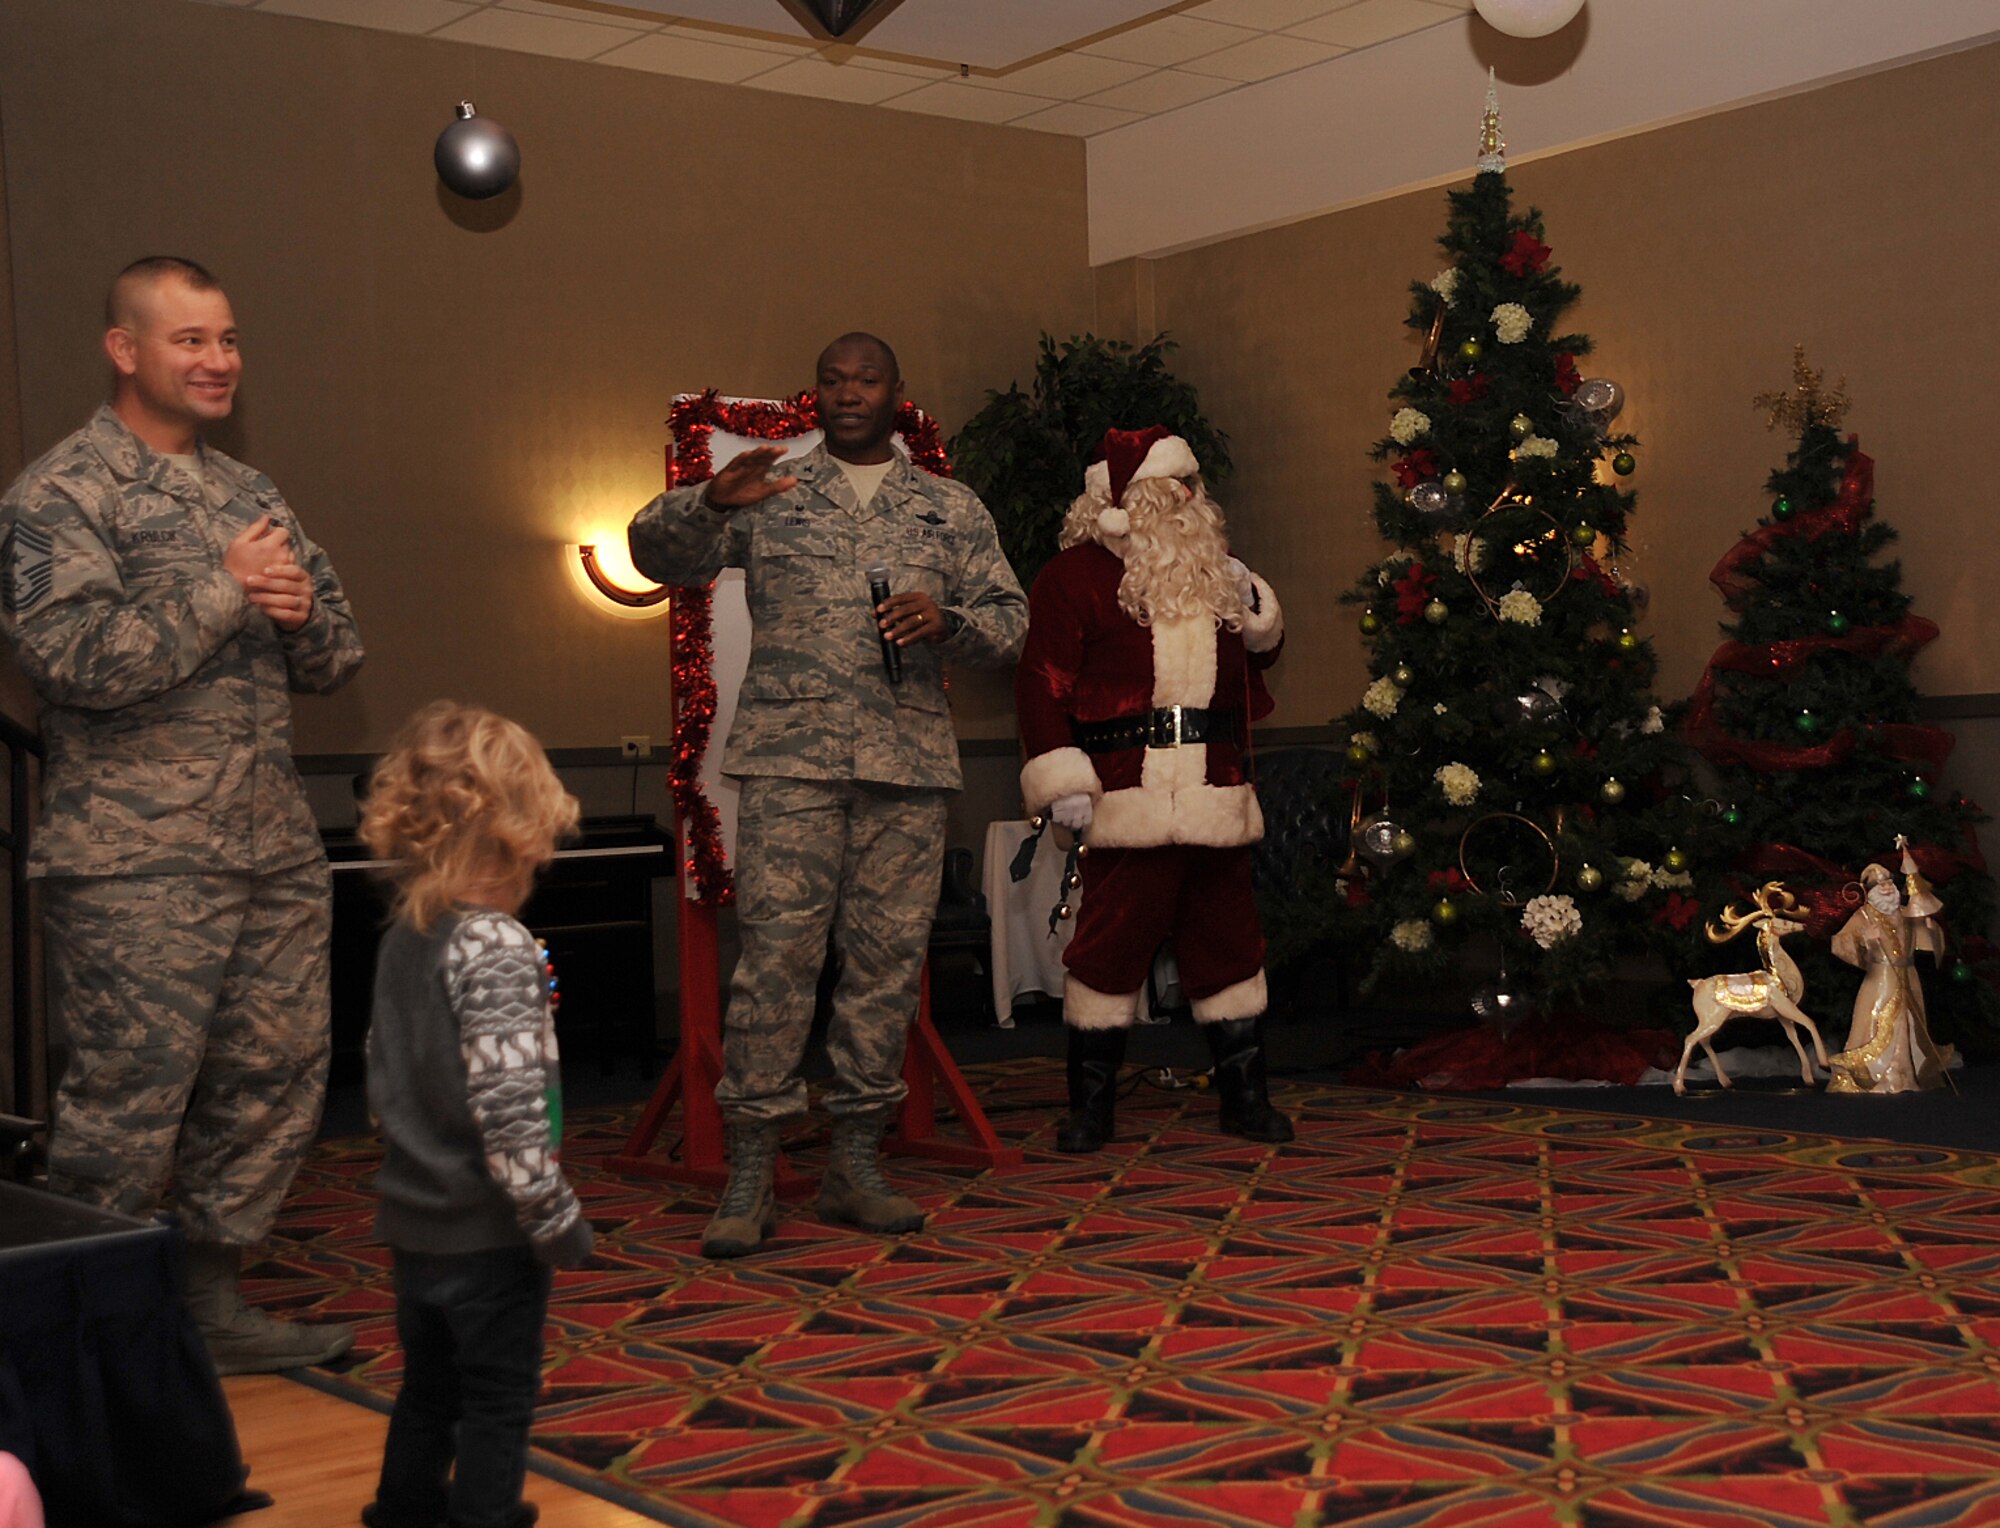 Col. Rodney Lewis, 319th Air Base Wing commander, greets the attendees at the Holiday Tree Lighting ceremony before lighting the tree with Chief Master Sgt. Todd Krulcik, 319th Air Base Wing command chief, and Santa Claus on Grand Forks Air Force Base, North Dakota, Dec. 7, 2015. The event is an annual event that signifies the beginning of the holidays. (U.S. Air Force photo by Senior Airman Bonnie Grantham/released)